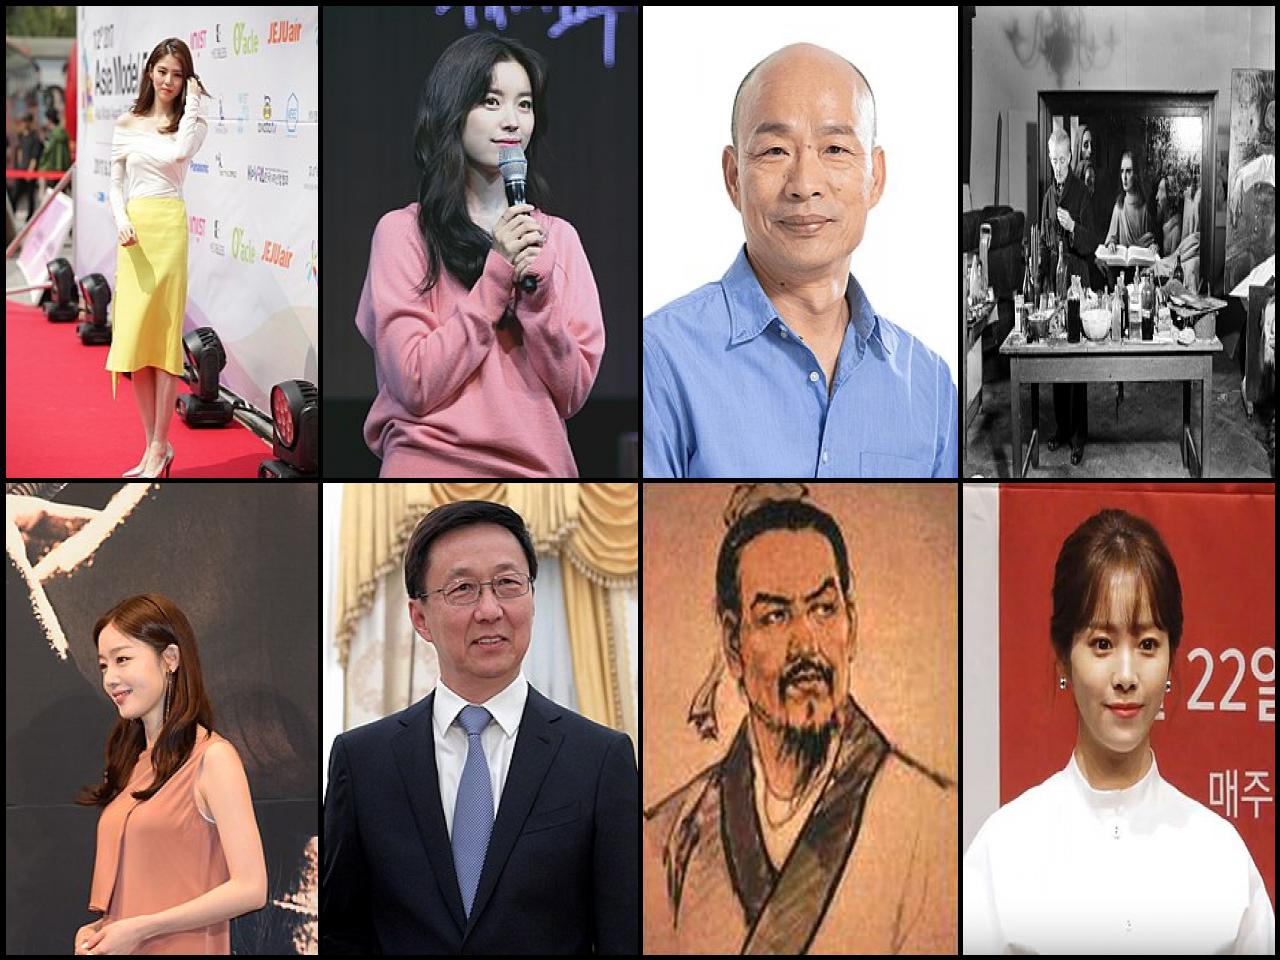 List of Famous people named <b>Han</b>